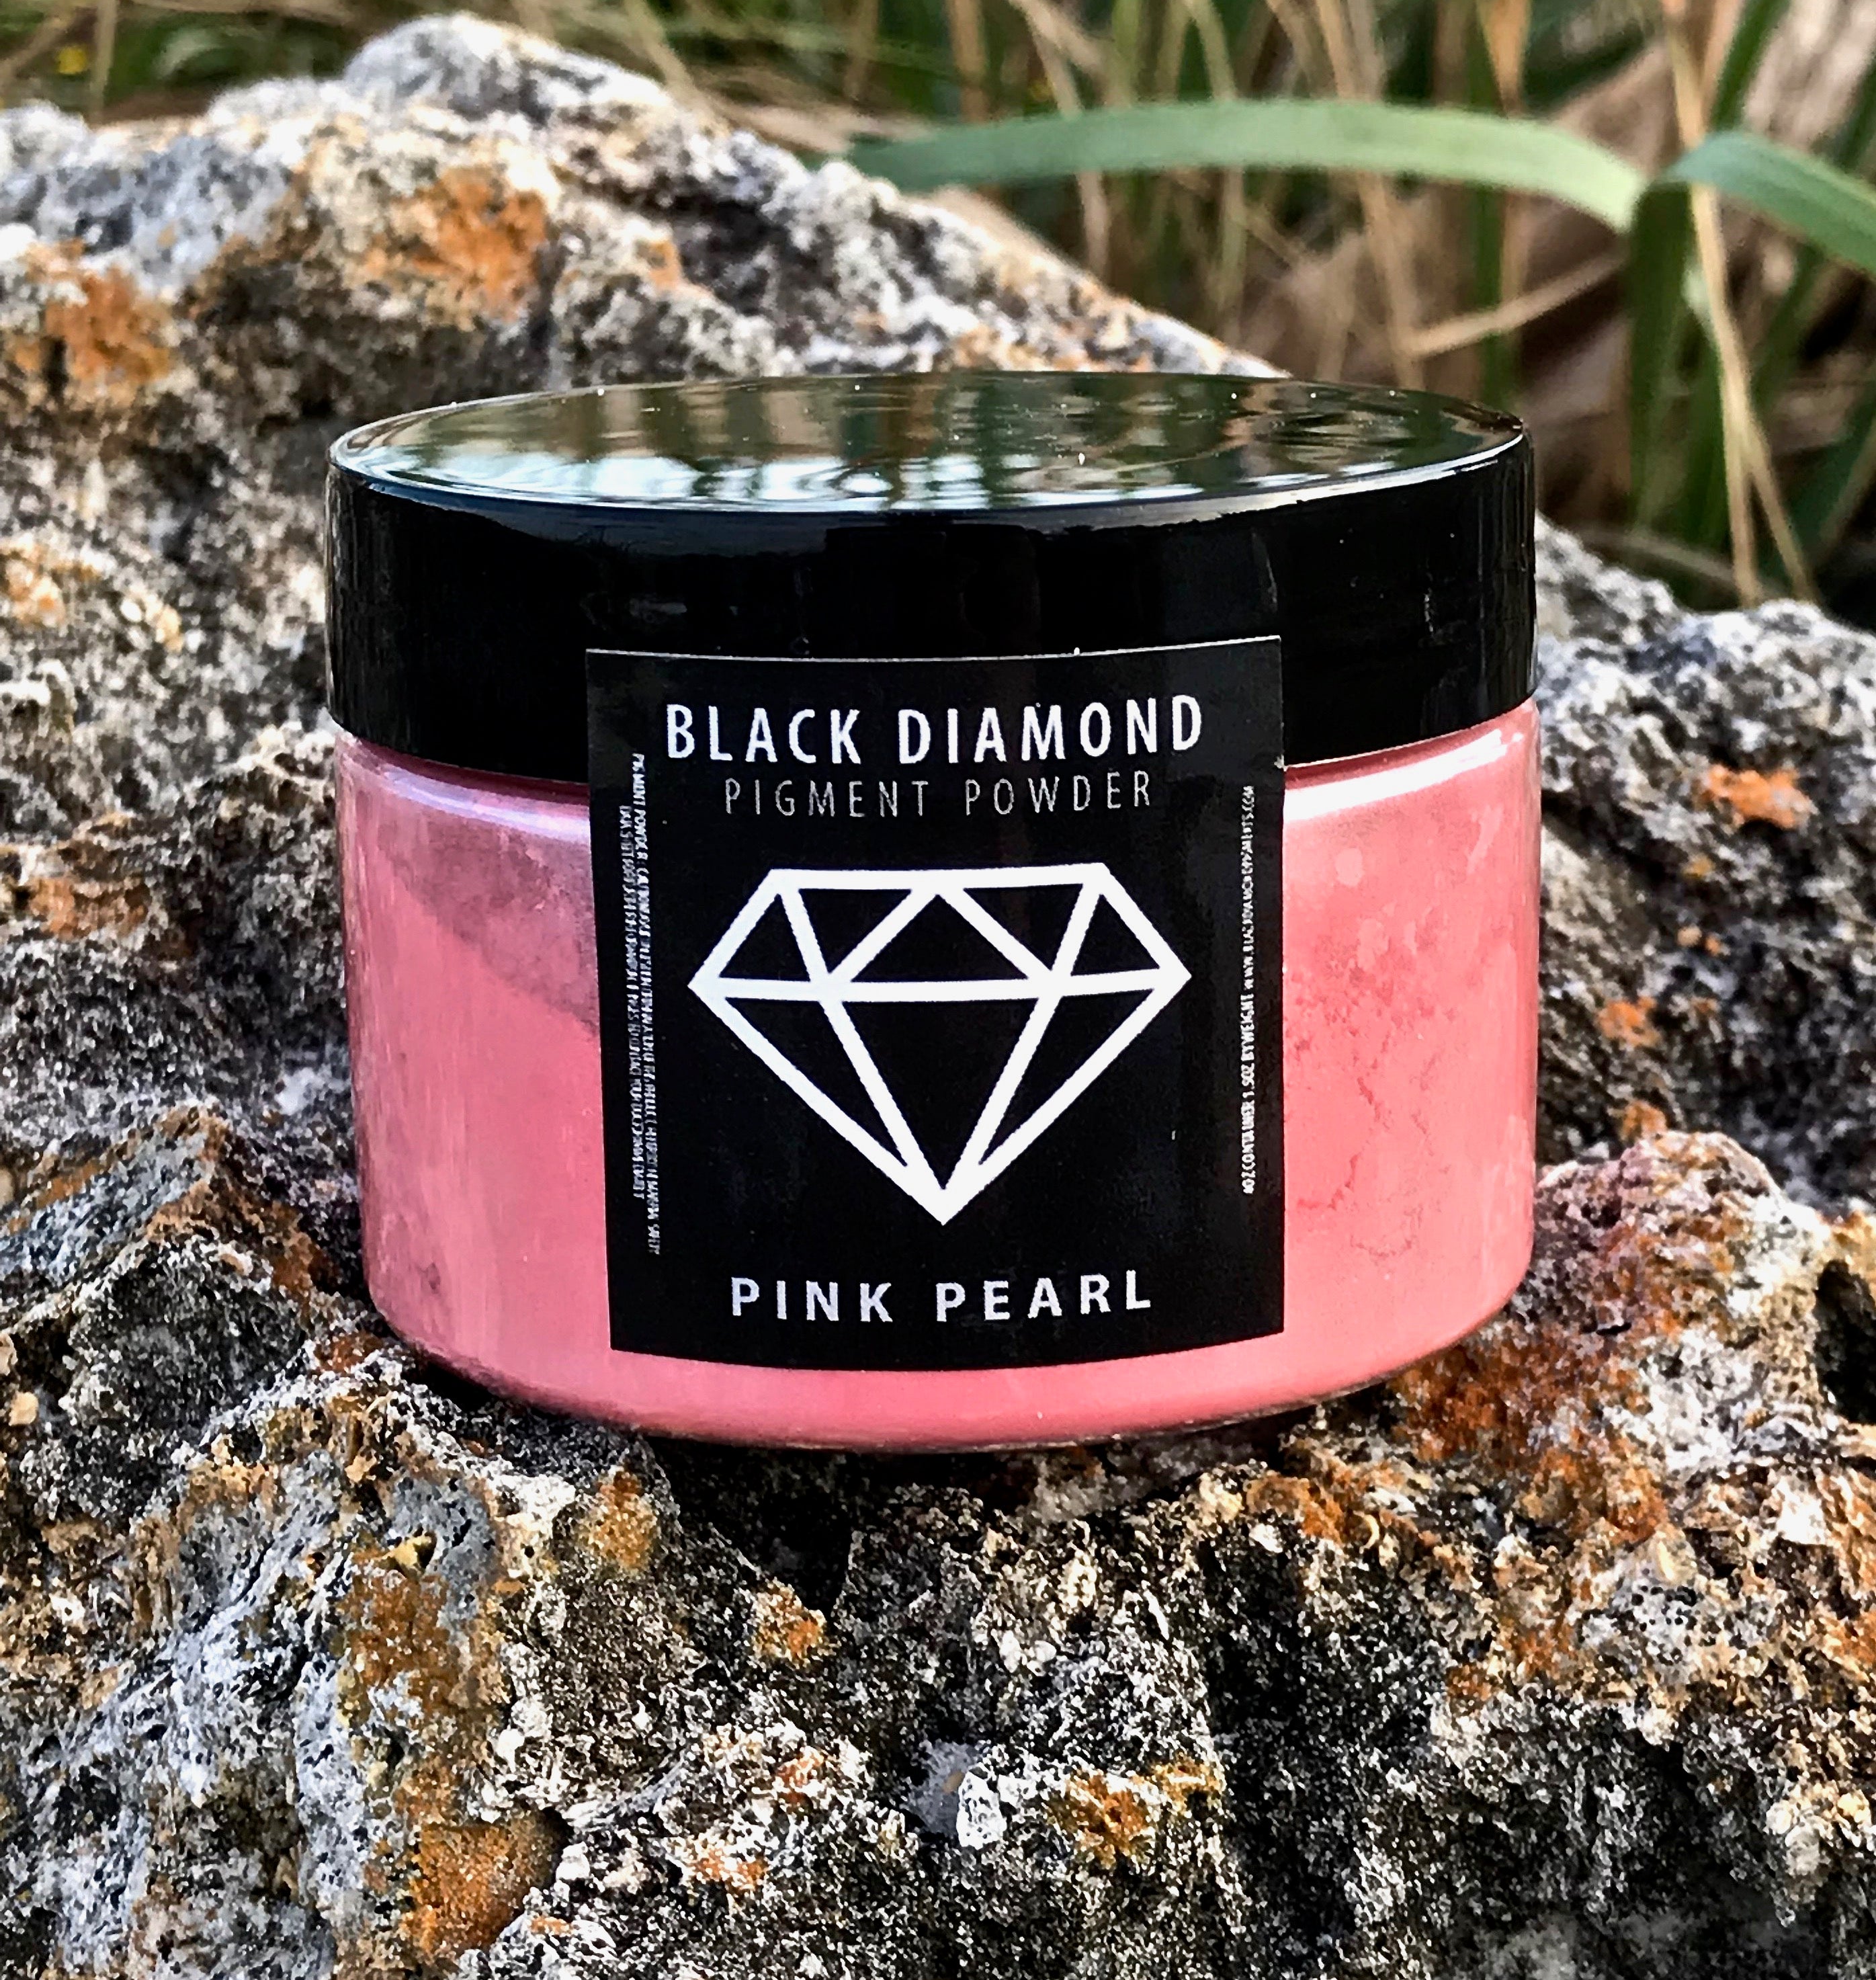 THE POWDER PINK & JET BLACK SPECIAL EDITION